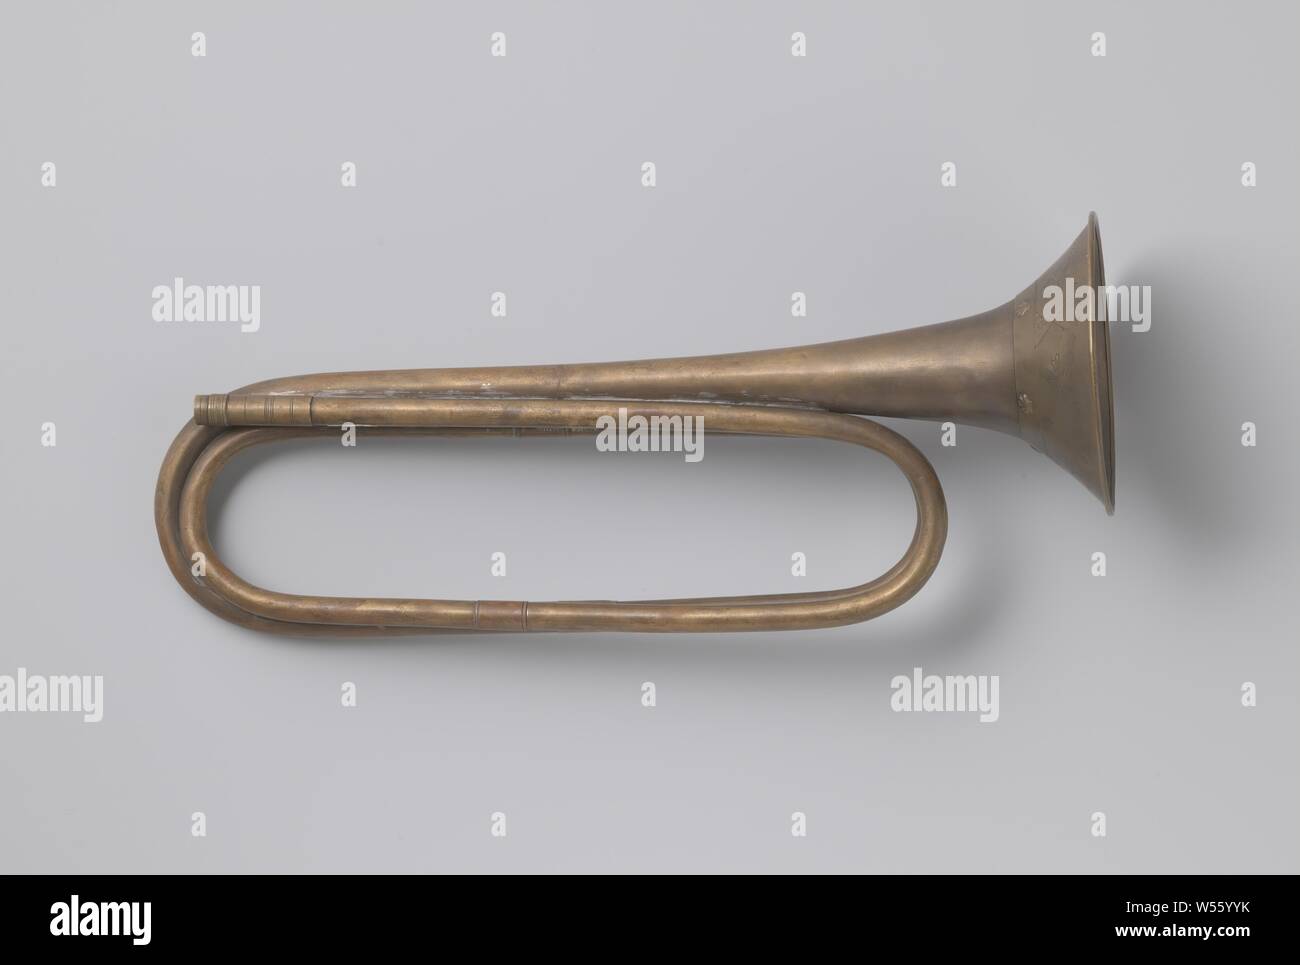 Trumpet, Trumpet in As. Around the cup is a wreath, decorated with leaf ornaments and garland and three crosses. The top edge is decorated with two grooves and a border of shell motifs and relief. Nozzle missing., anonymous, c. 1800, brass (alloy), h 40.0 cm × w 17.5 cm d 12.0 cm Stock Photo